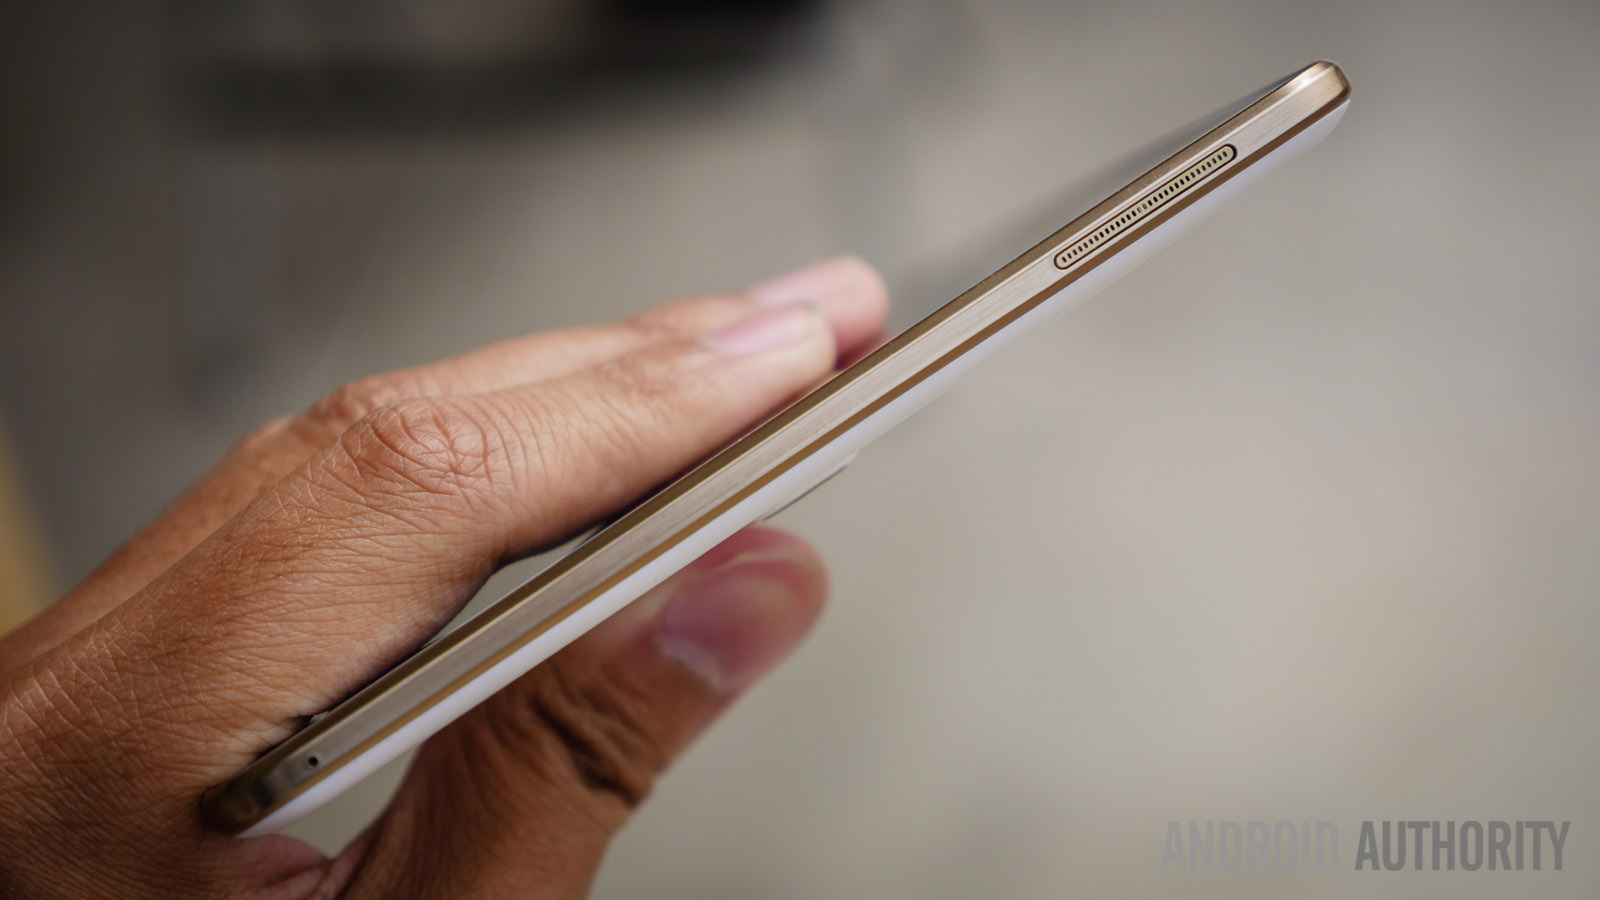 samsung galaxy tab s 8.4 review (24 of 27)